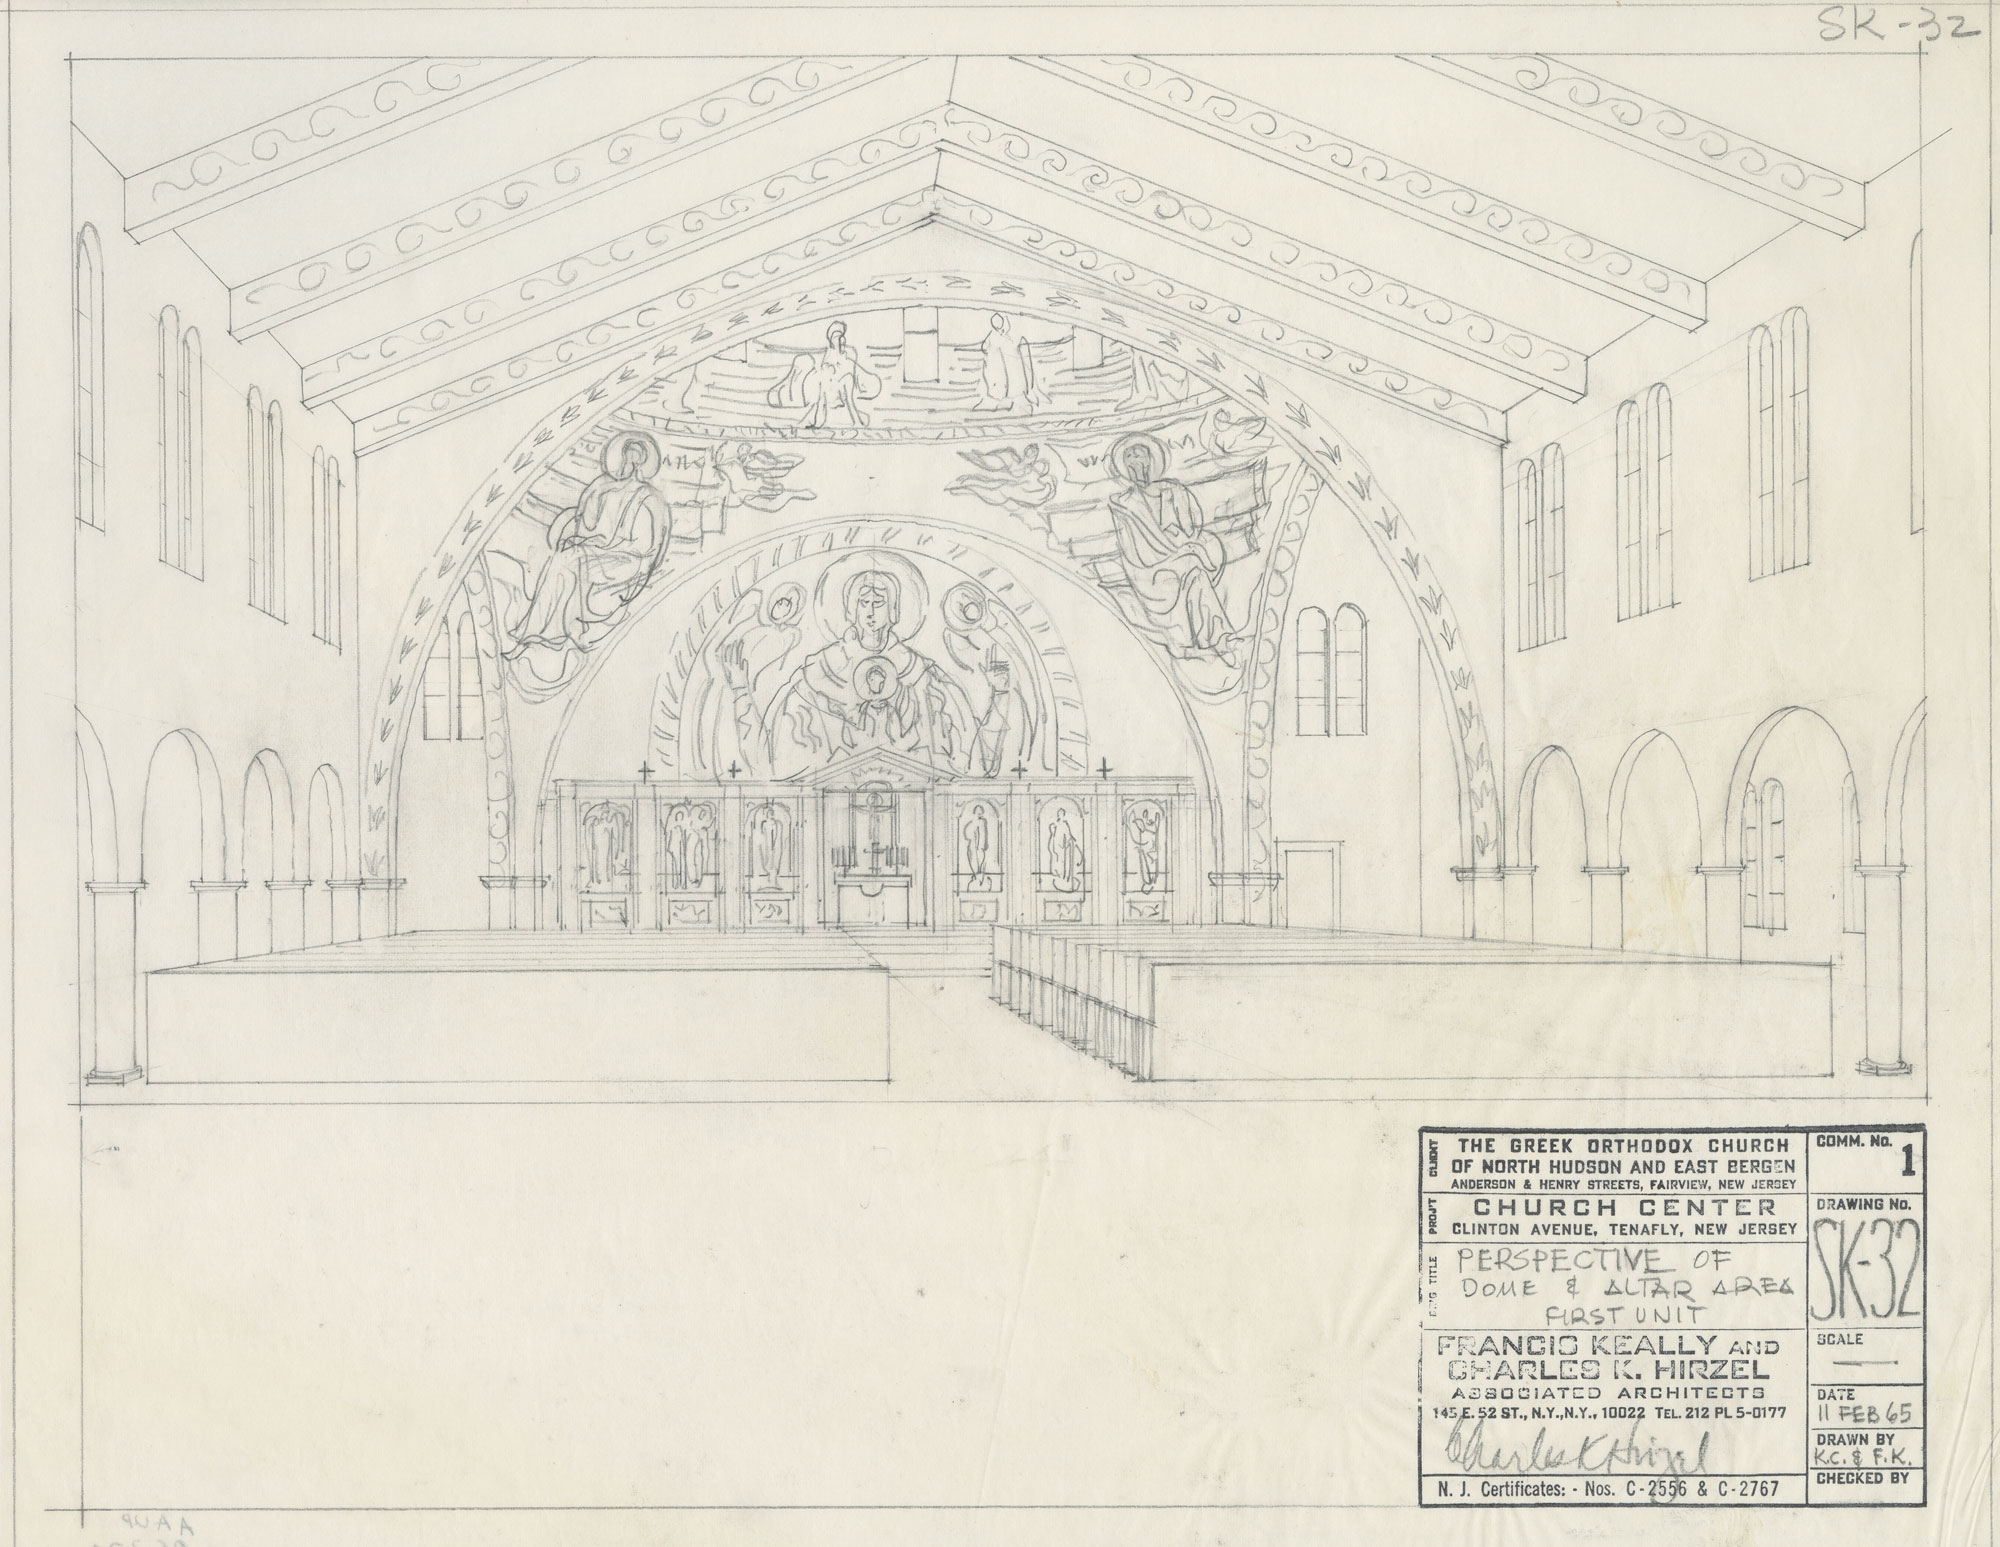 Architechtural drawing of interior of Greek Orthodox Cathedral of St. John the Theologian